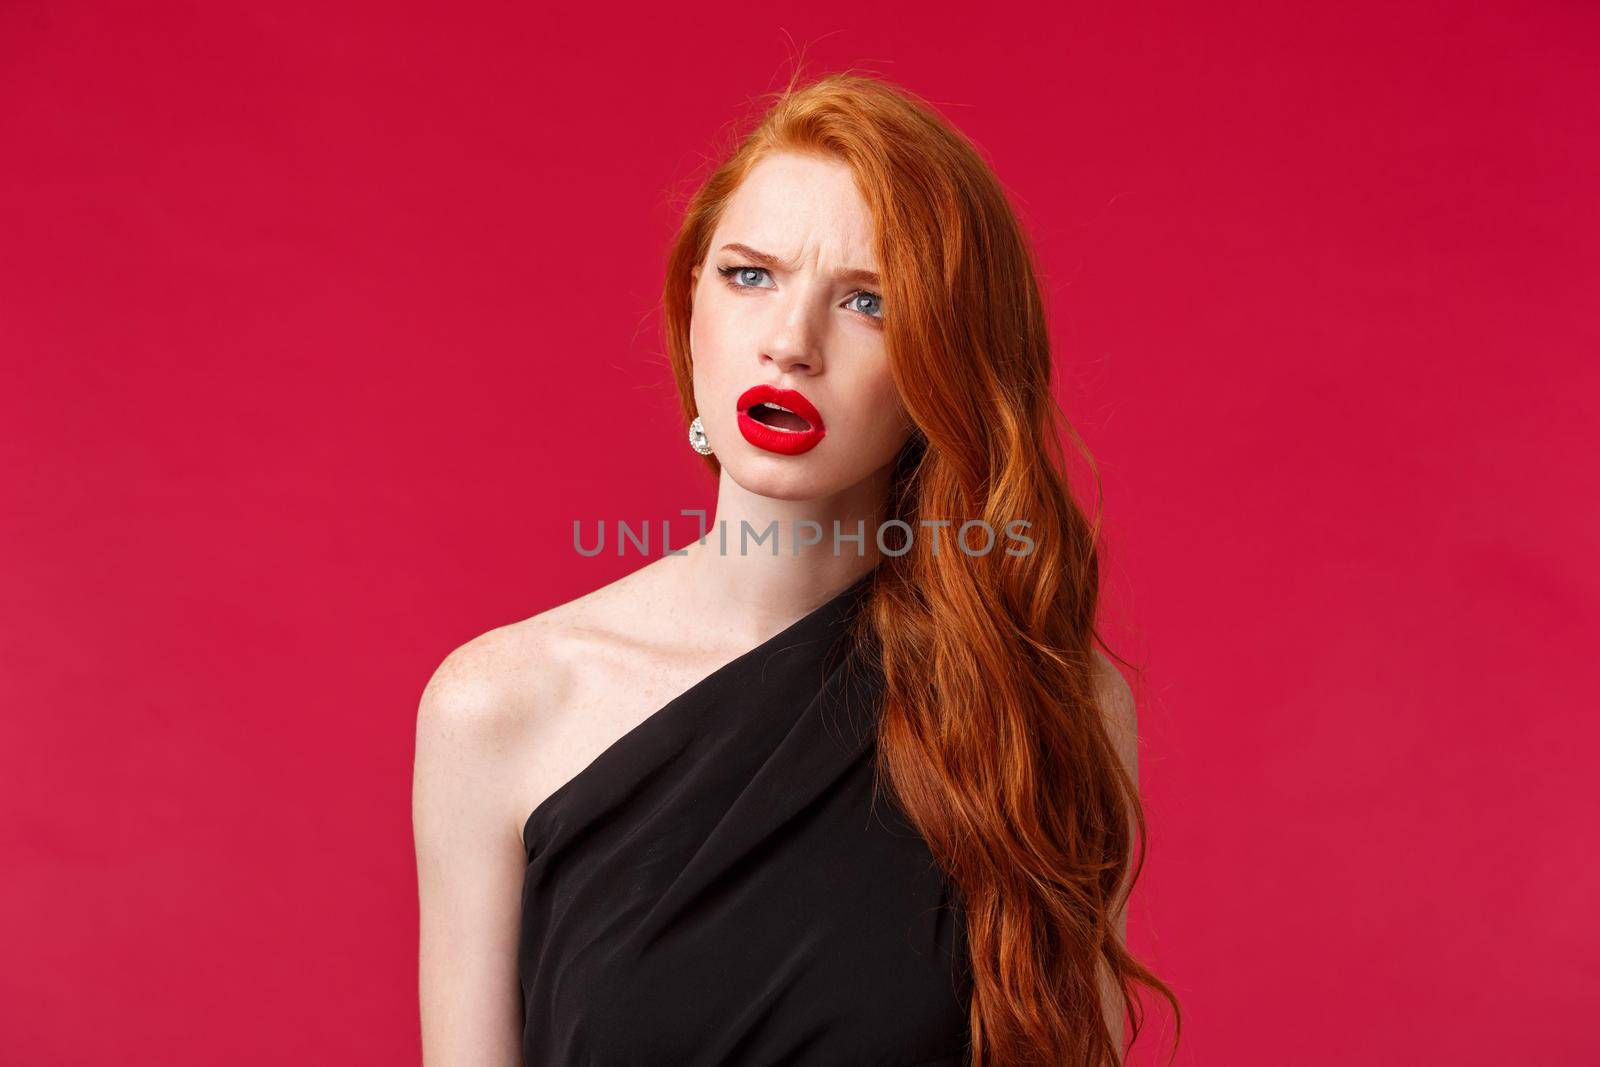 Close-up portrait of perplexed and confused young redhead woman seeing something strange, squinting and frowning as looking left troubled identify what is this, stand red background.